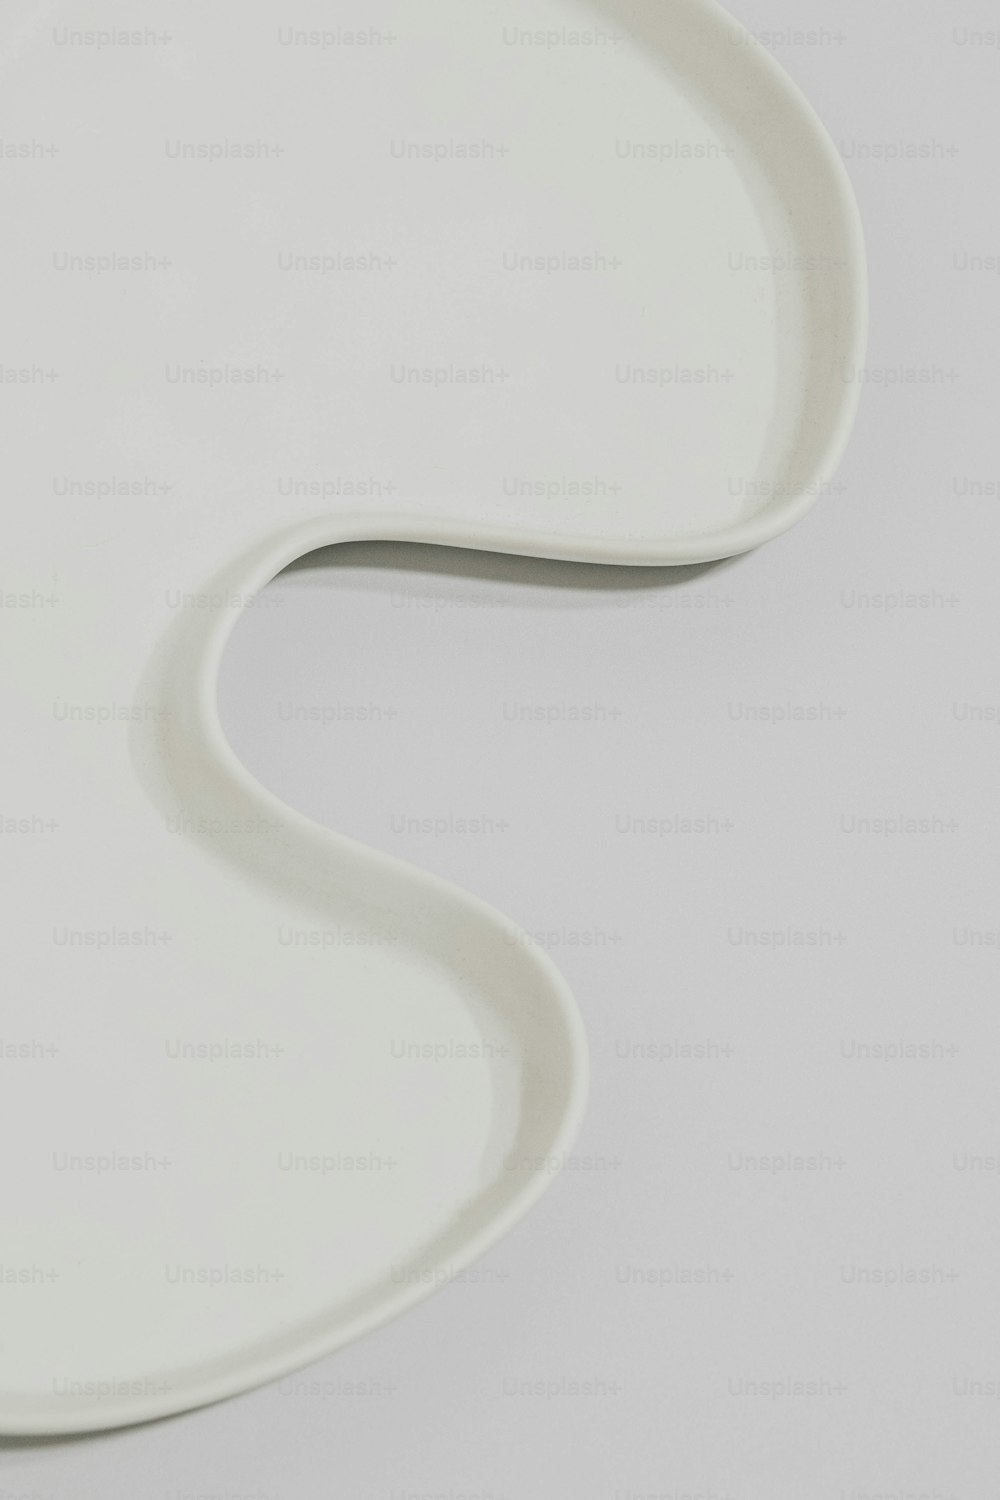 a white plate with a curved design on it